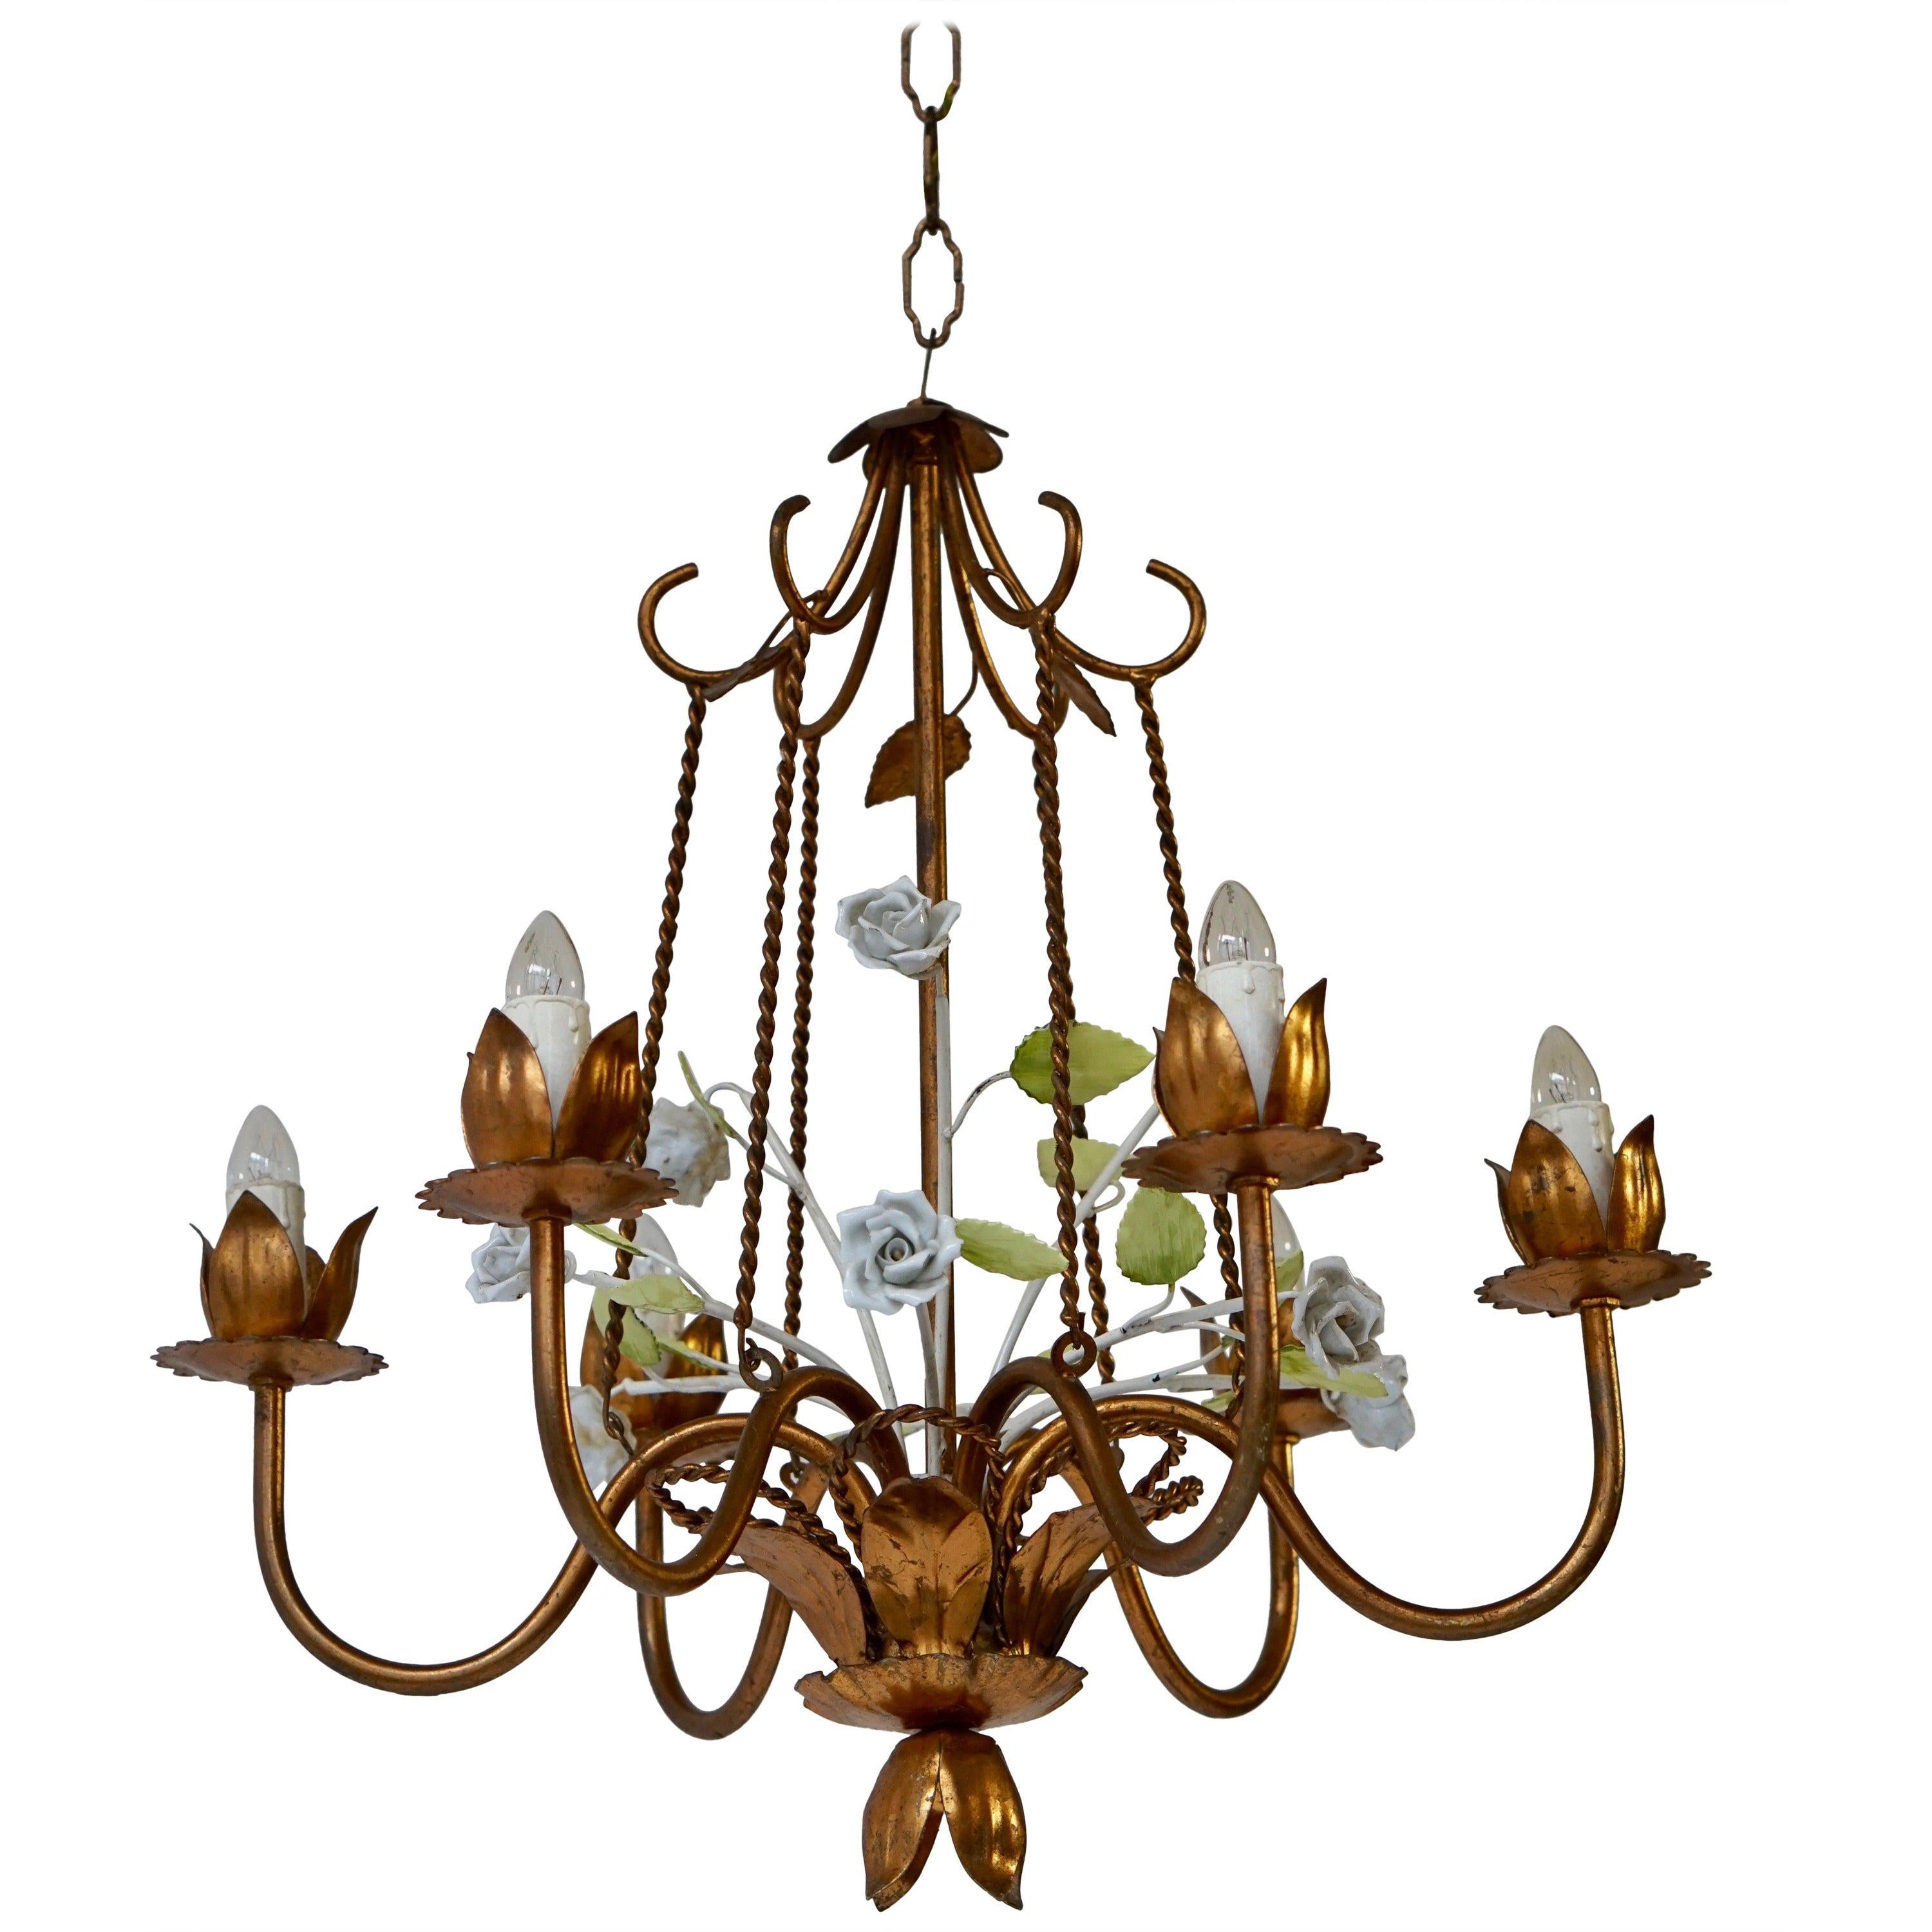 Brass Chandelier with Porcelain Flowers